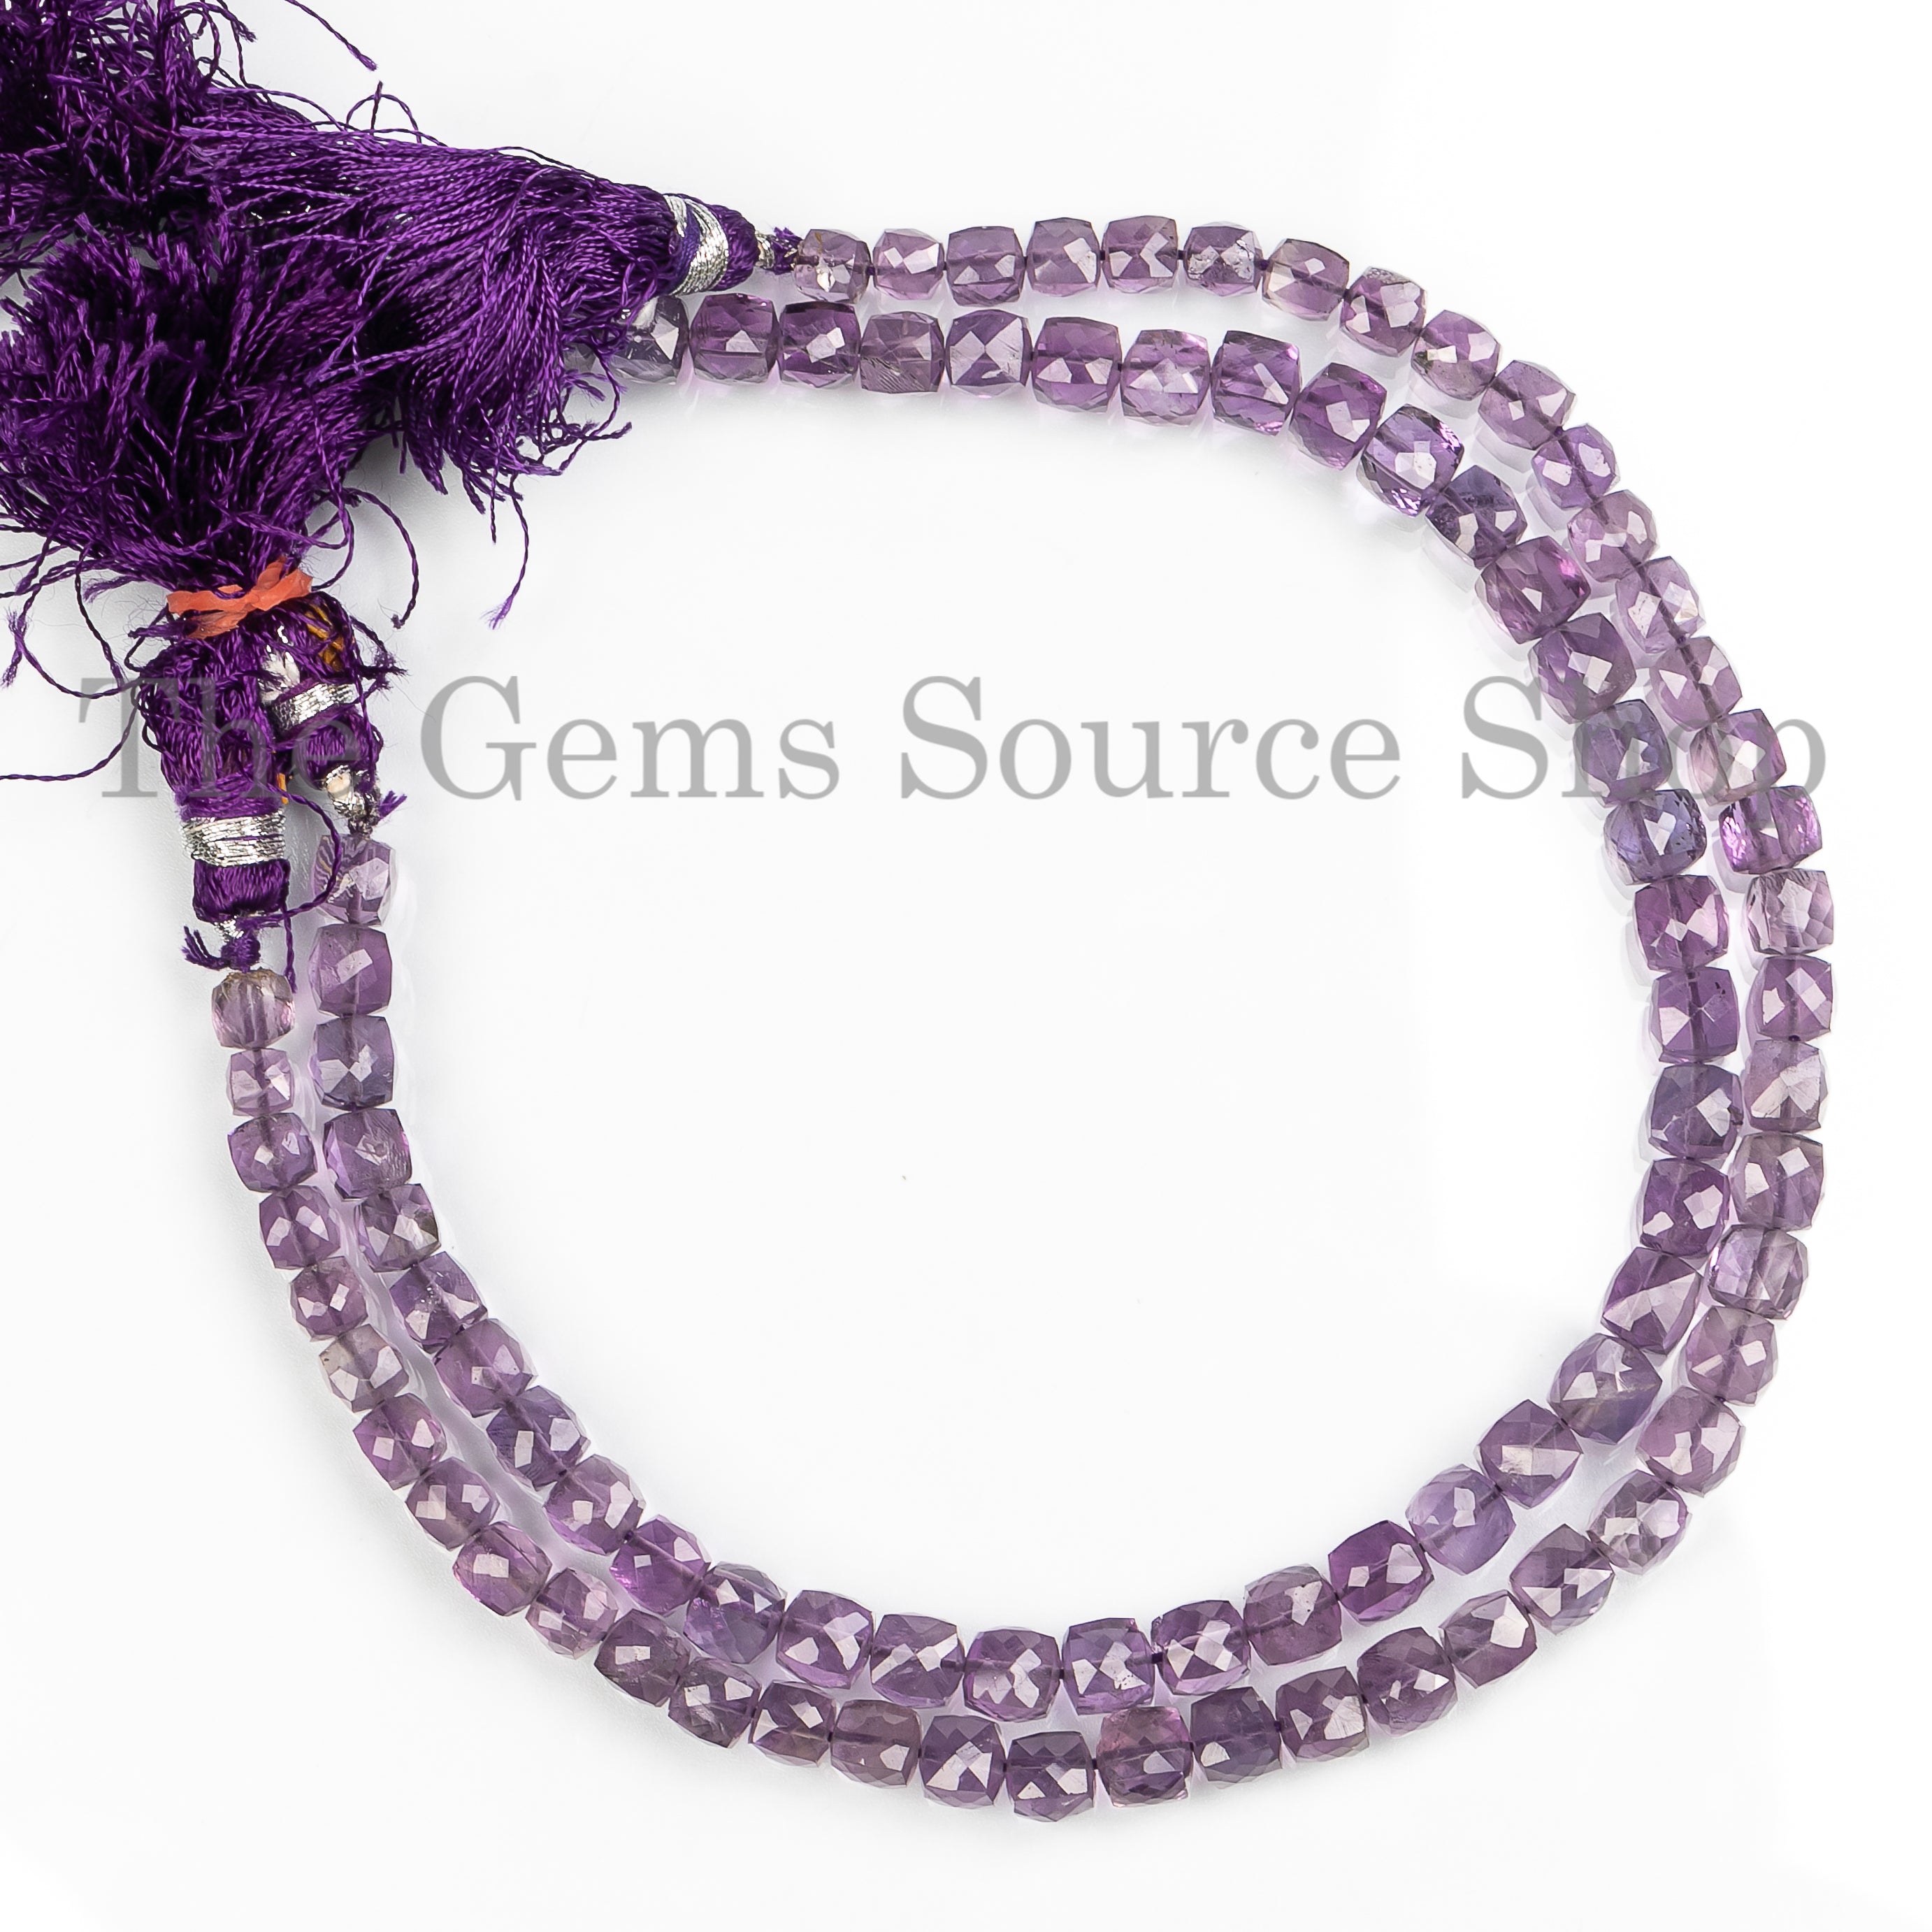 4.5-6.5mm Amethyst Faceted Box Shape Beads, Amethyst Beads, Amethyst Cube Beads, Amethyst Faceted Beads, Gemstone Beads Briolettes